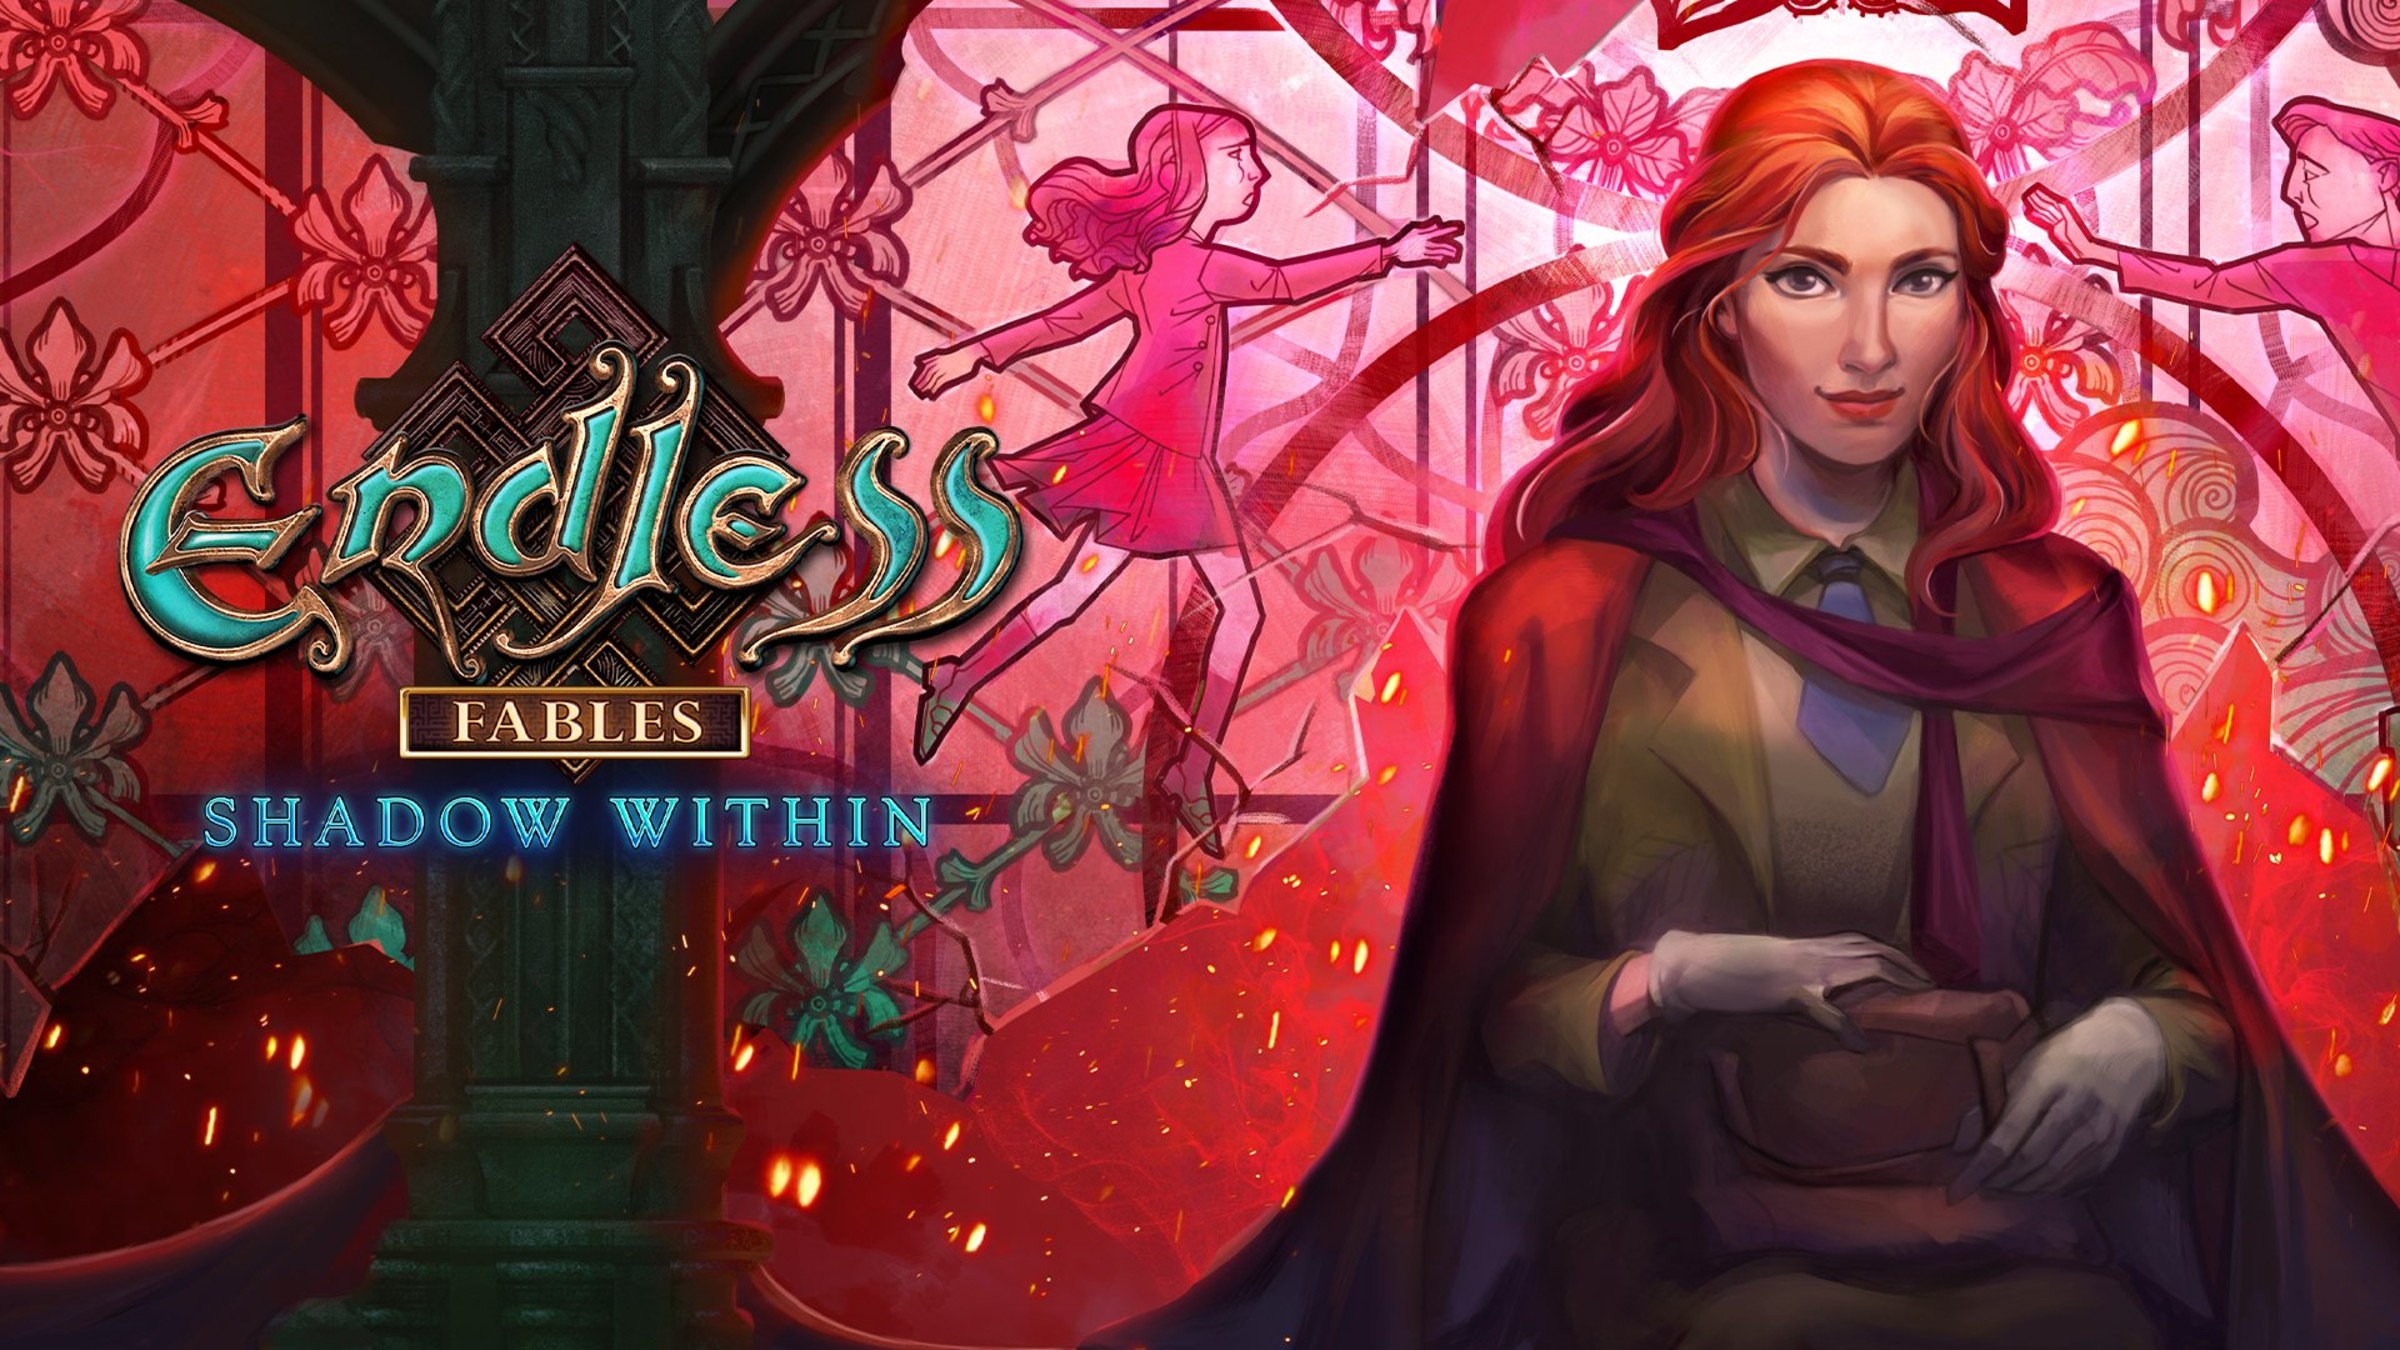 Endless Fables: Shadow Within for Nintendo Switch - Nintendo Official Site